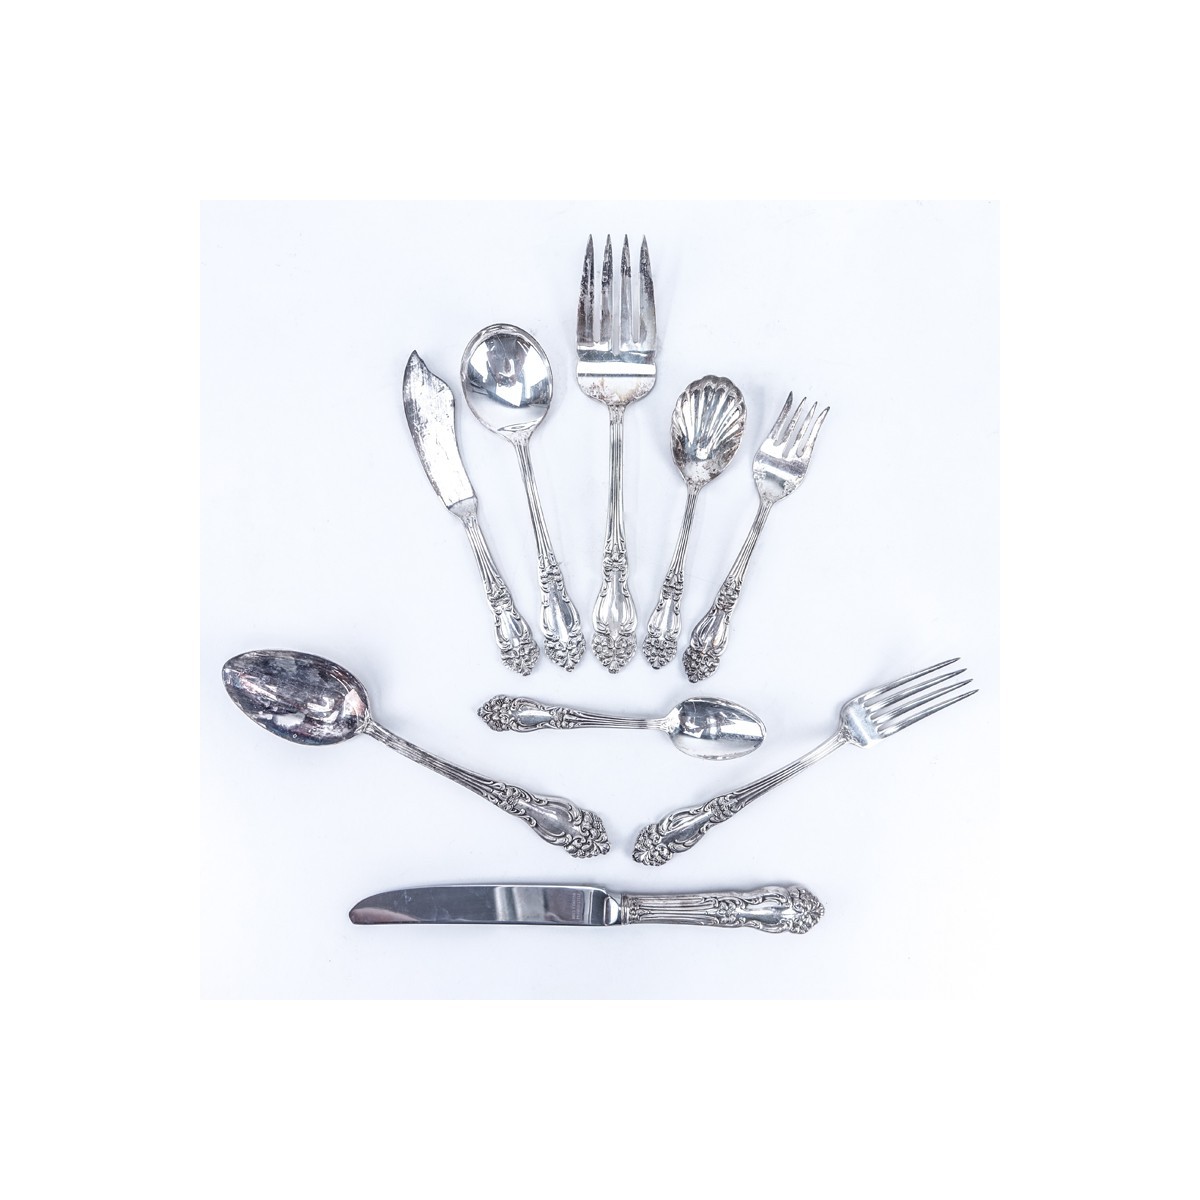 Seventy Six (76) Piece Reed and Barton "Festivity" Silver Plated Flatware. Includes: 12 forks 7-5/8", 12 salad forks 6-1/4", 1 tablespoon 8-1/4", 12 round bowl soup spoon 7-1/8", 24 teaspoons, 12 knives 9-1/2", cold meat fork, flat master butter spreader,